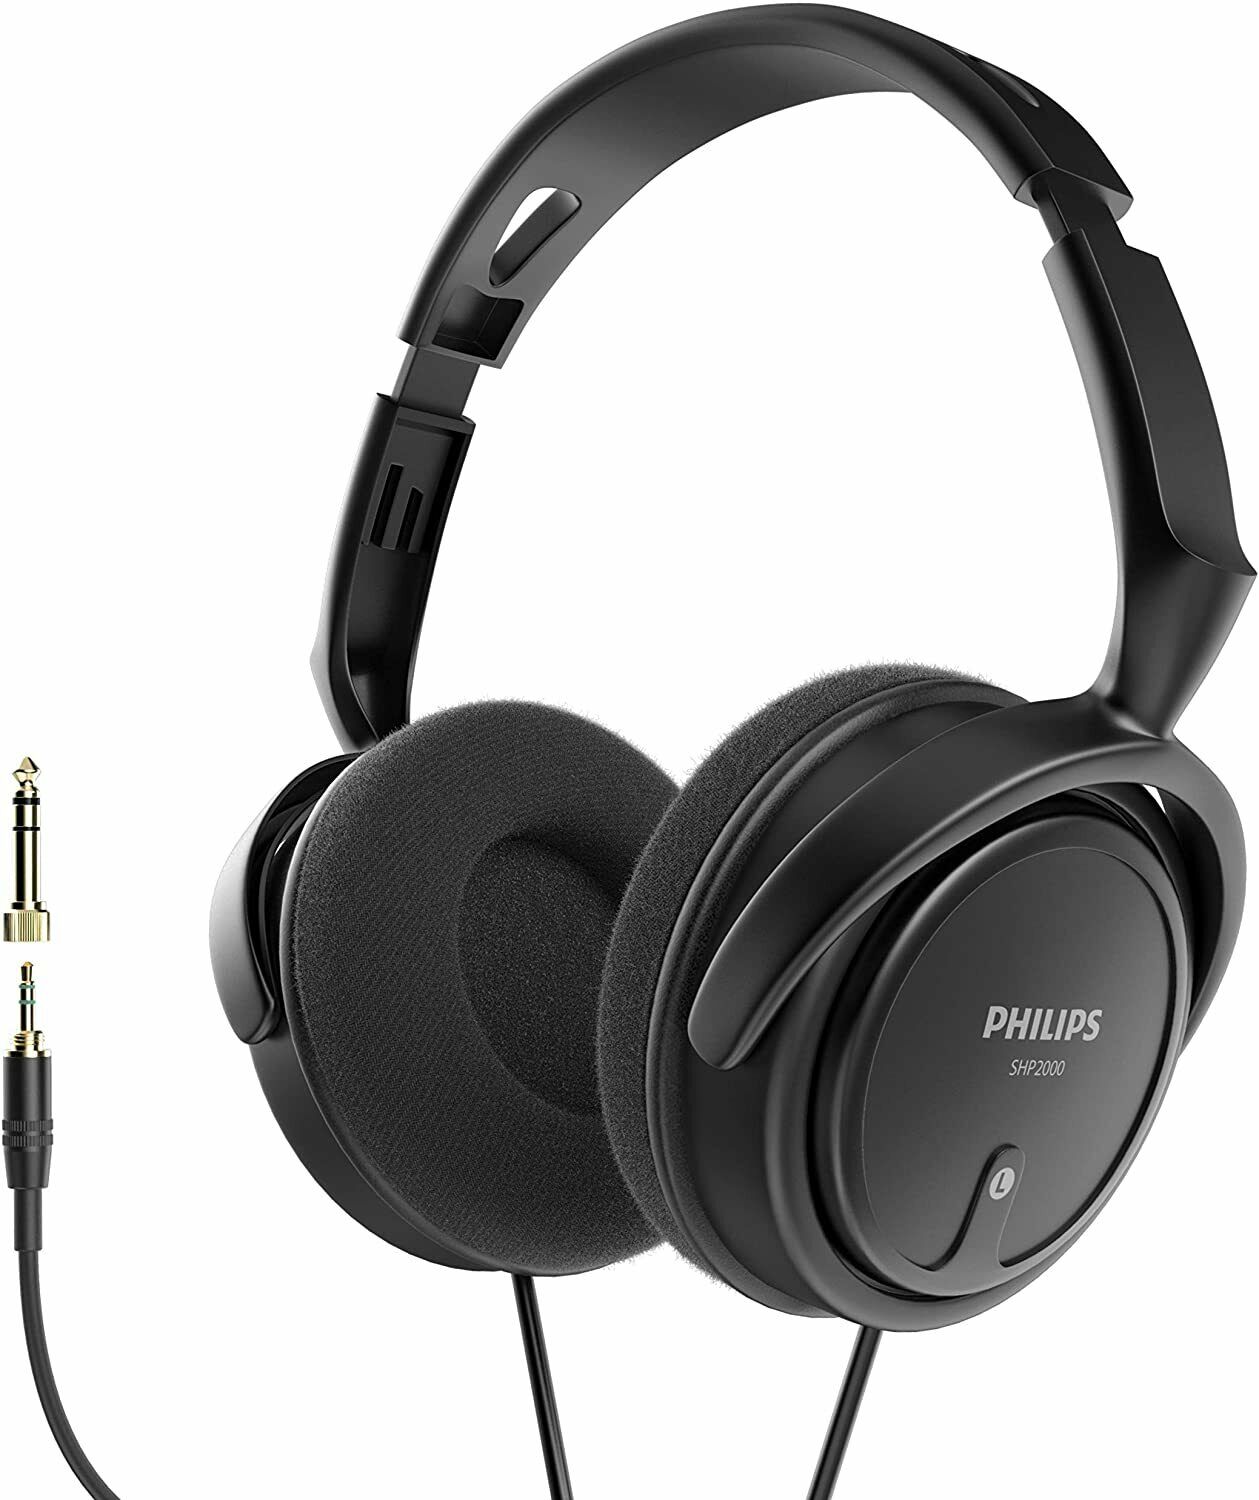 Philips Wired Stereo Headphones For Podcasts, Studio Monitoring And Recording